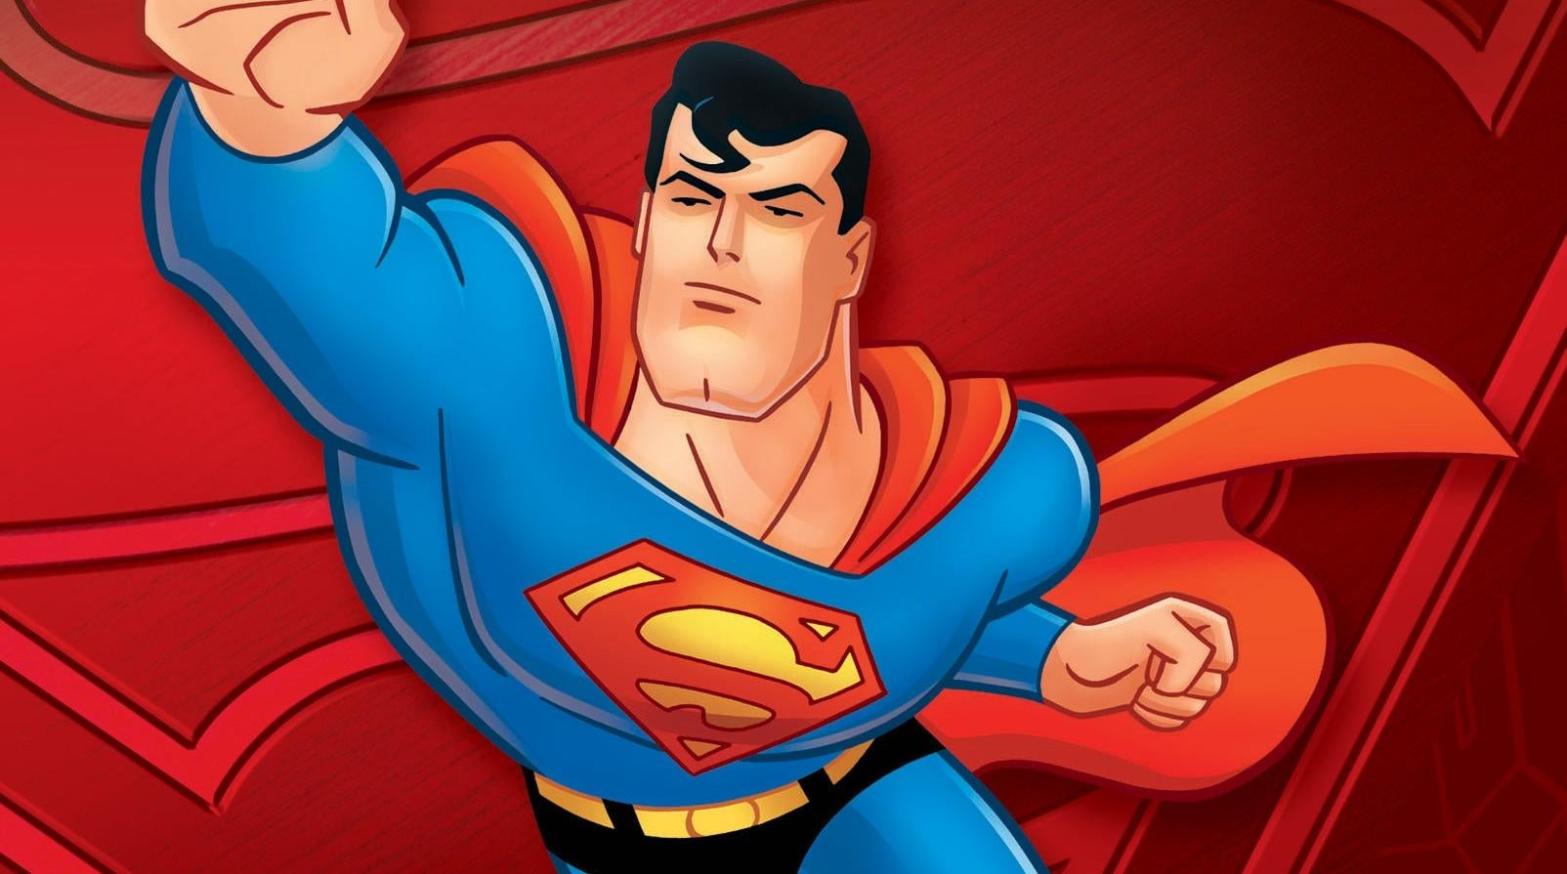 Here comes a brand-new Superman: The Animated Series box set flying your way. (Image: Warner Bros.)